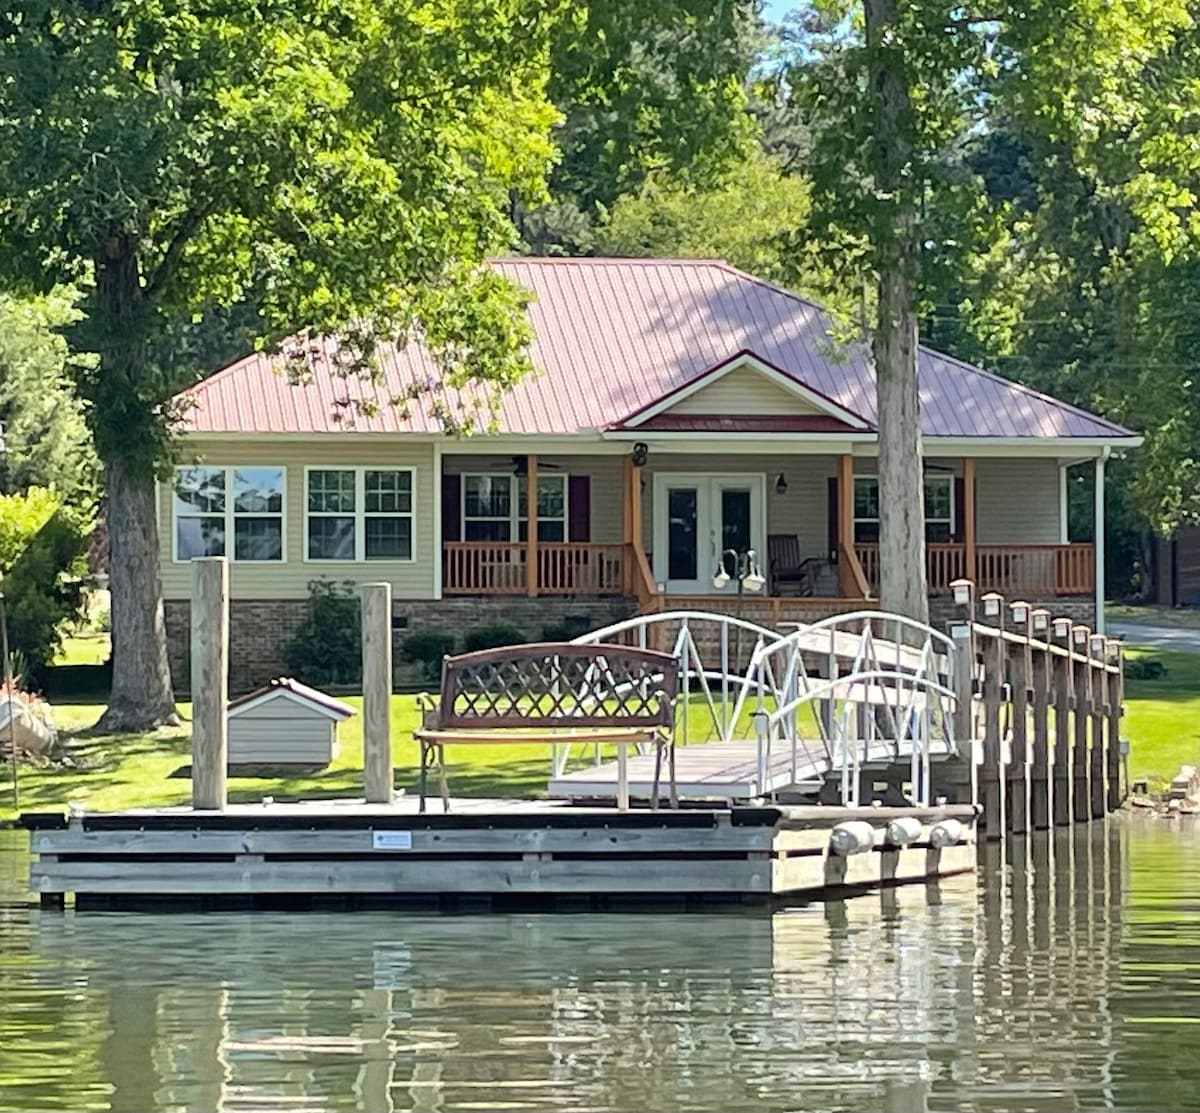 Red’s Retreat for lake fun, fishing & relaxation